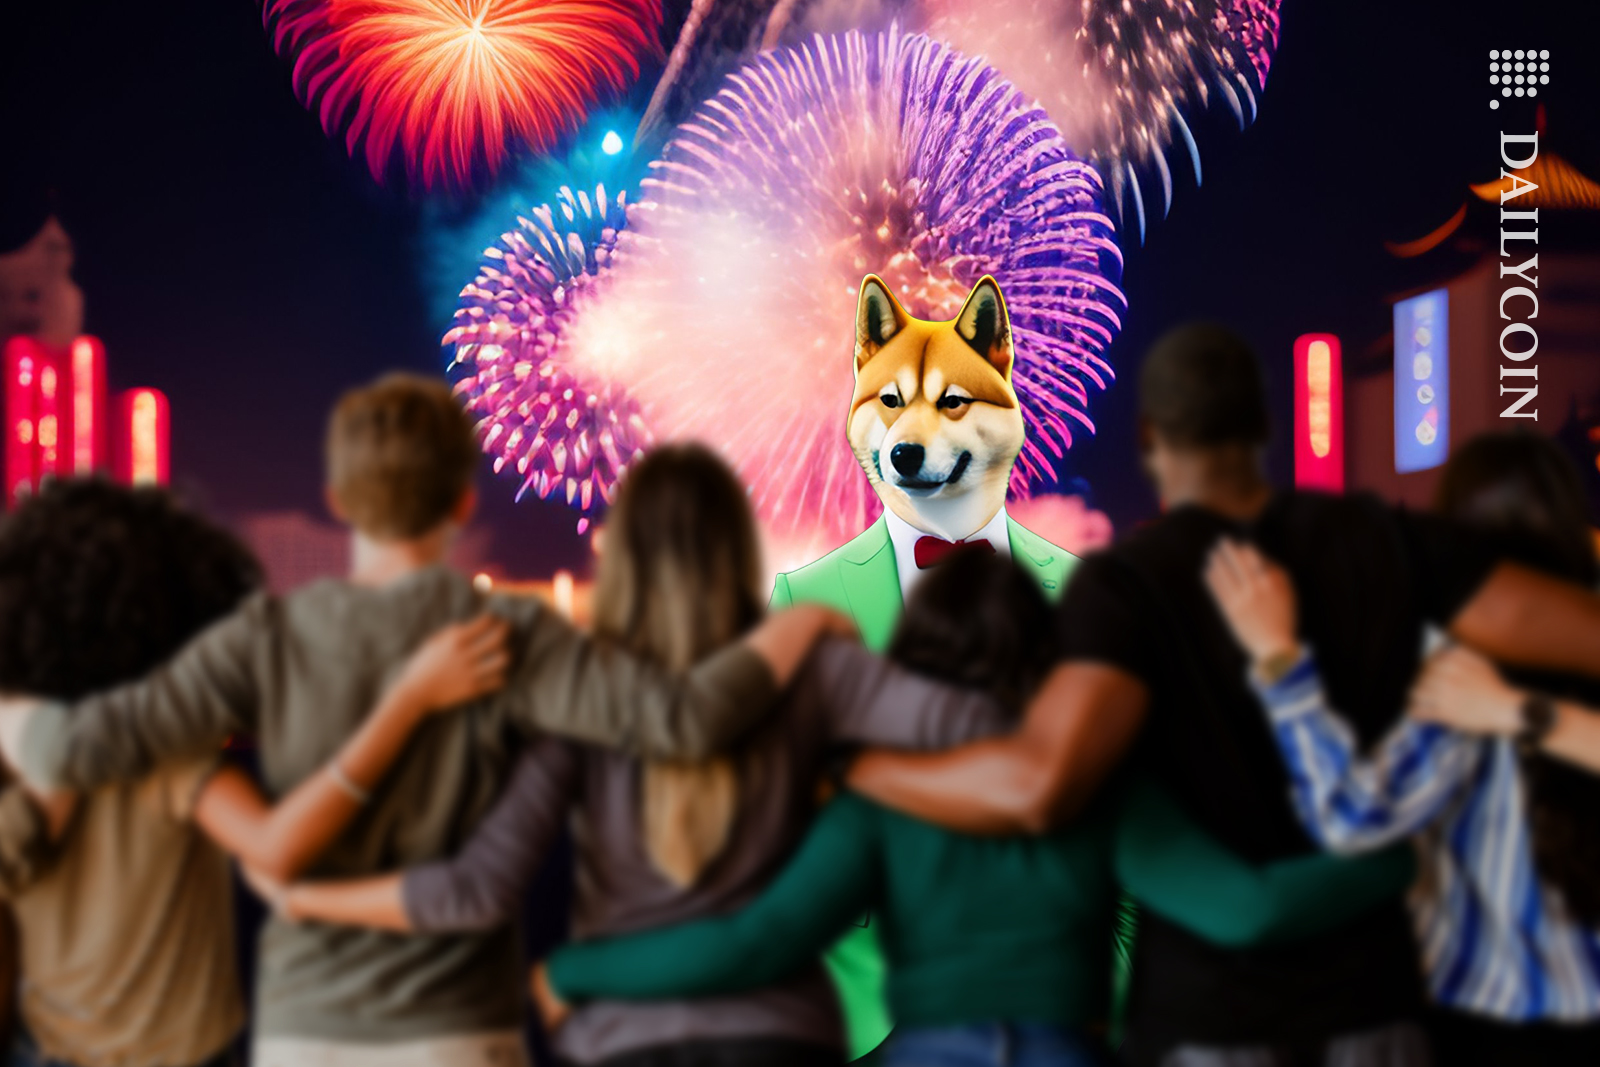 Shiba Inu putting on a firework display for his community.